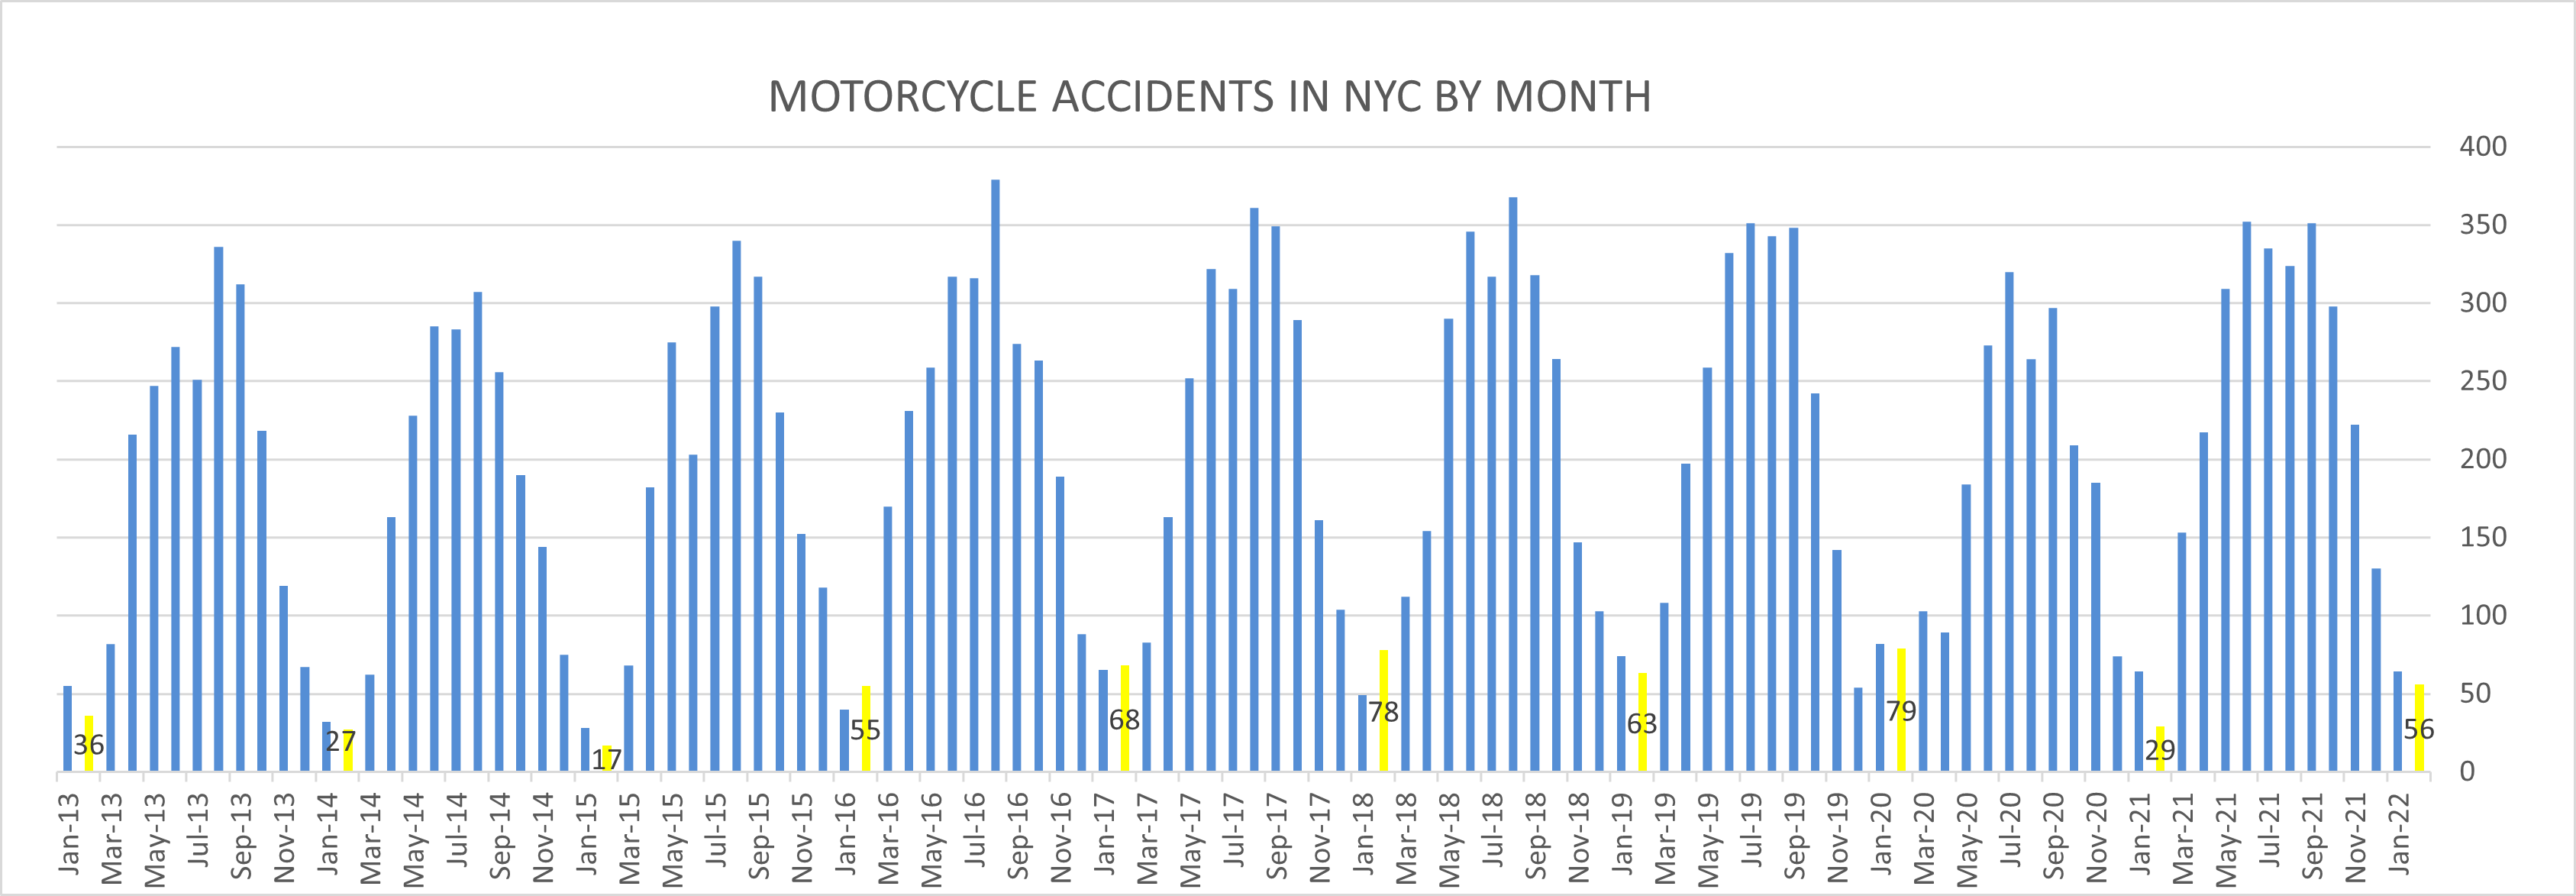 Motorcycle Accidents New York City February 2022